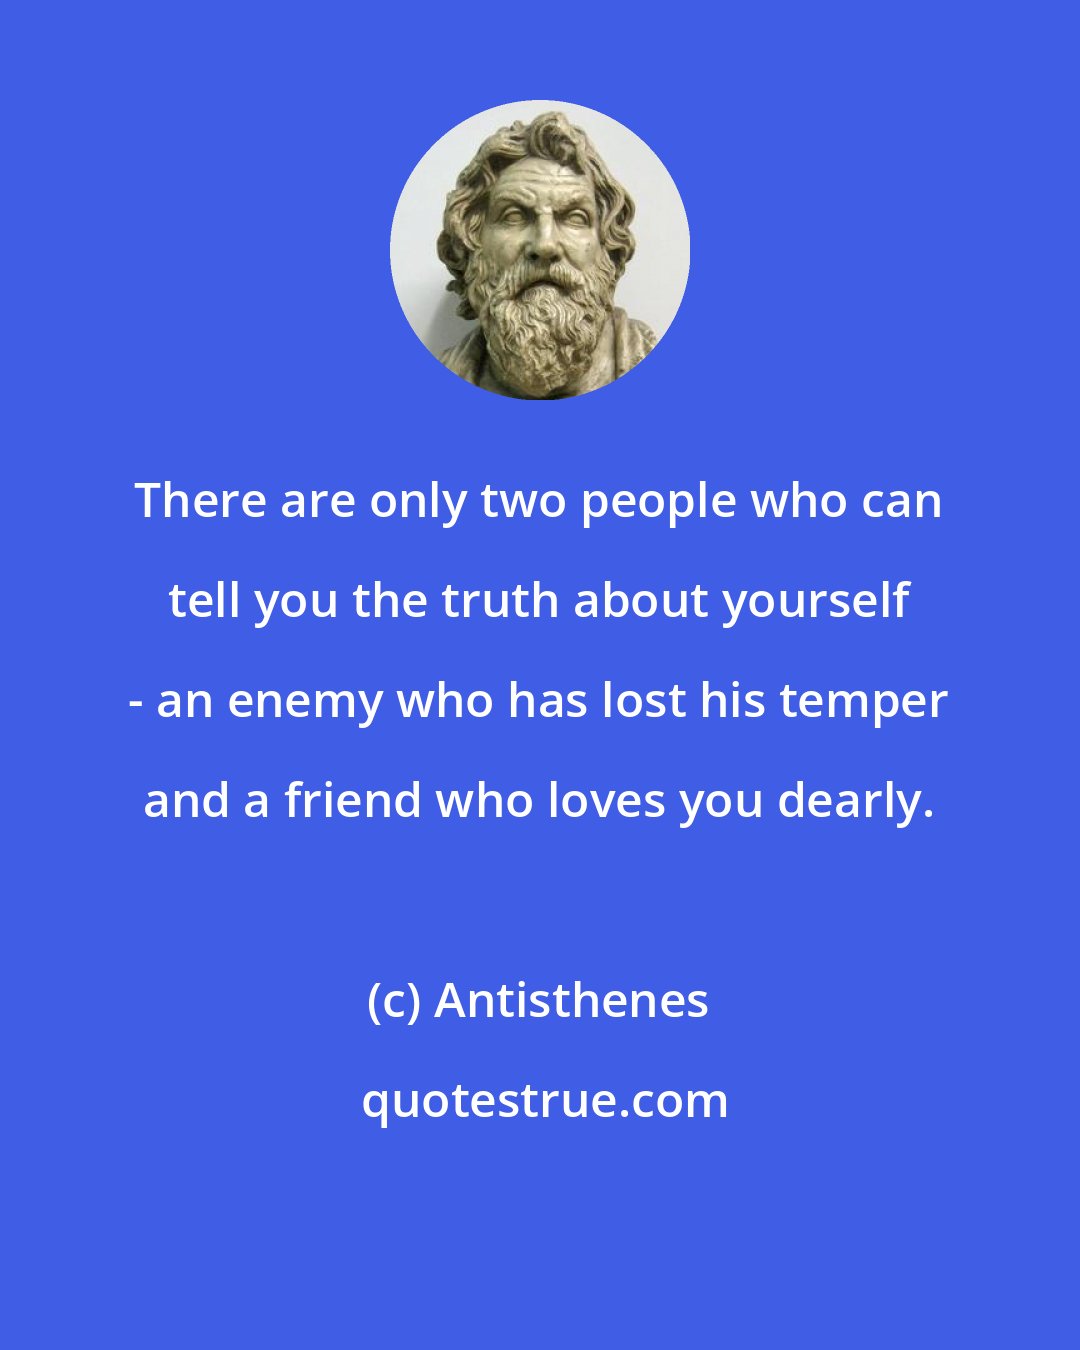 Antisthenes: There are only two people who can tell you the truth about yourself - an enemy who has lost his temper and a friend who loves you dearly.